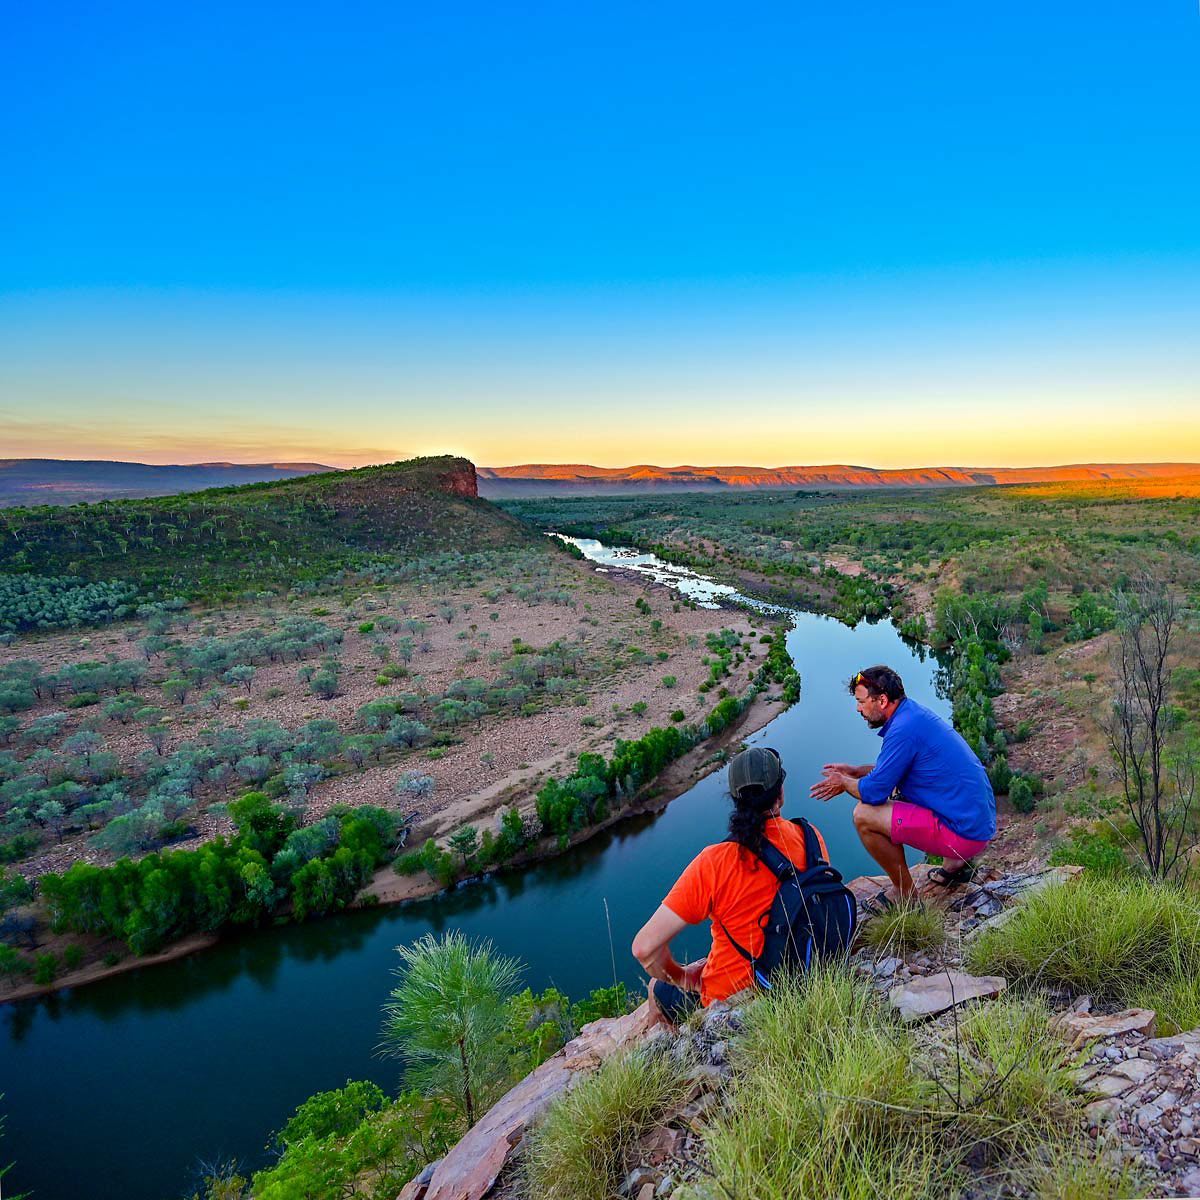 Only one spot left for our Kimberley Photography Tagalong next month up the Gibb River Road.
One on one teaching, adventure and epic landscapes from dawn to dusk and beyond.
Link in bio or DM if you’re keen.
@carlislerogers @outbacktagalongs